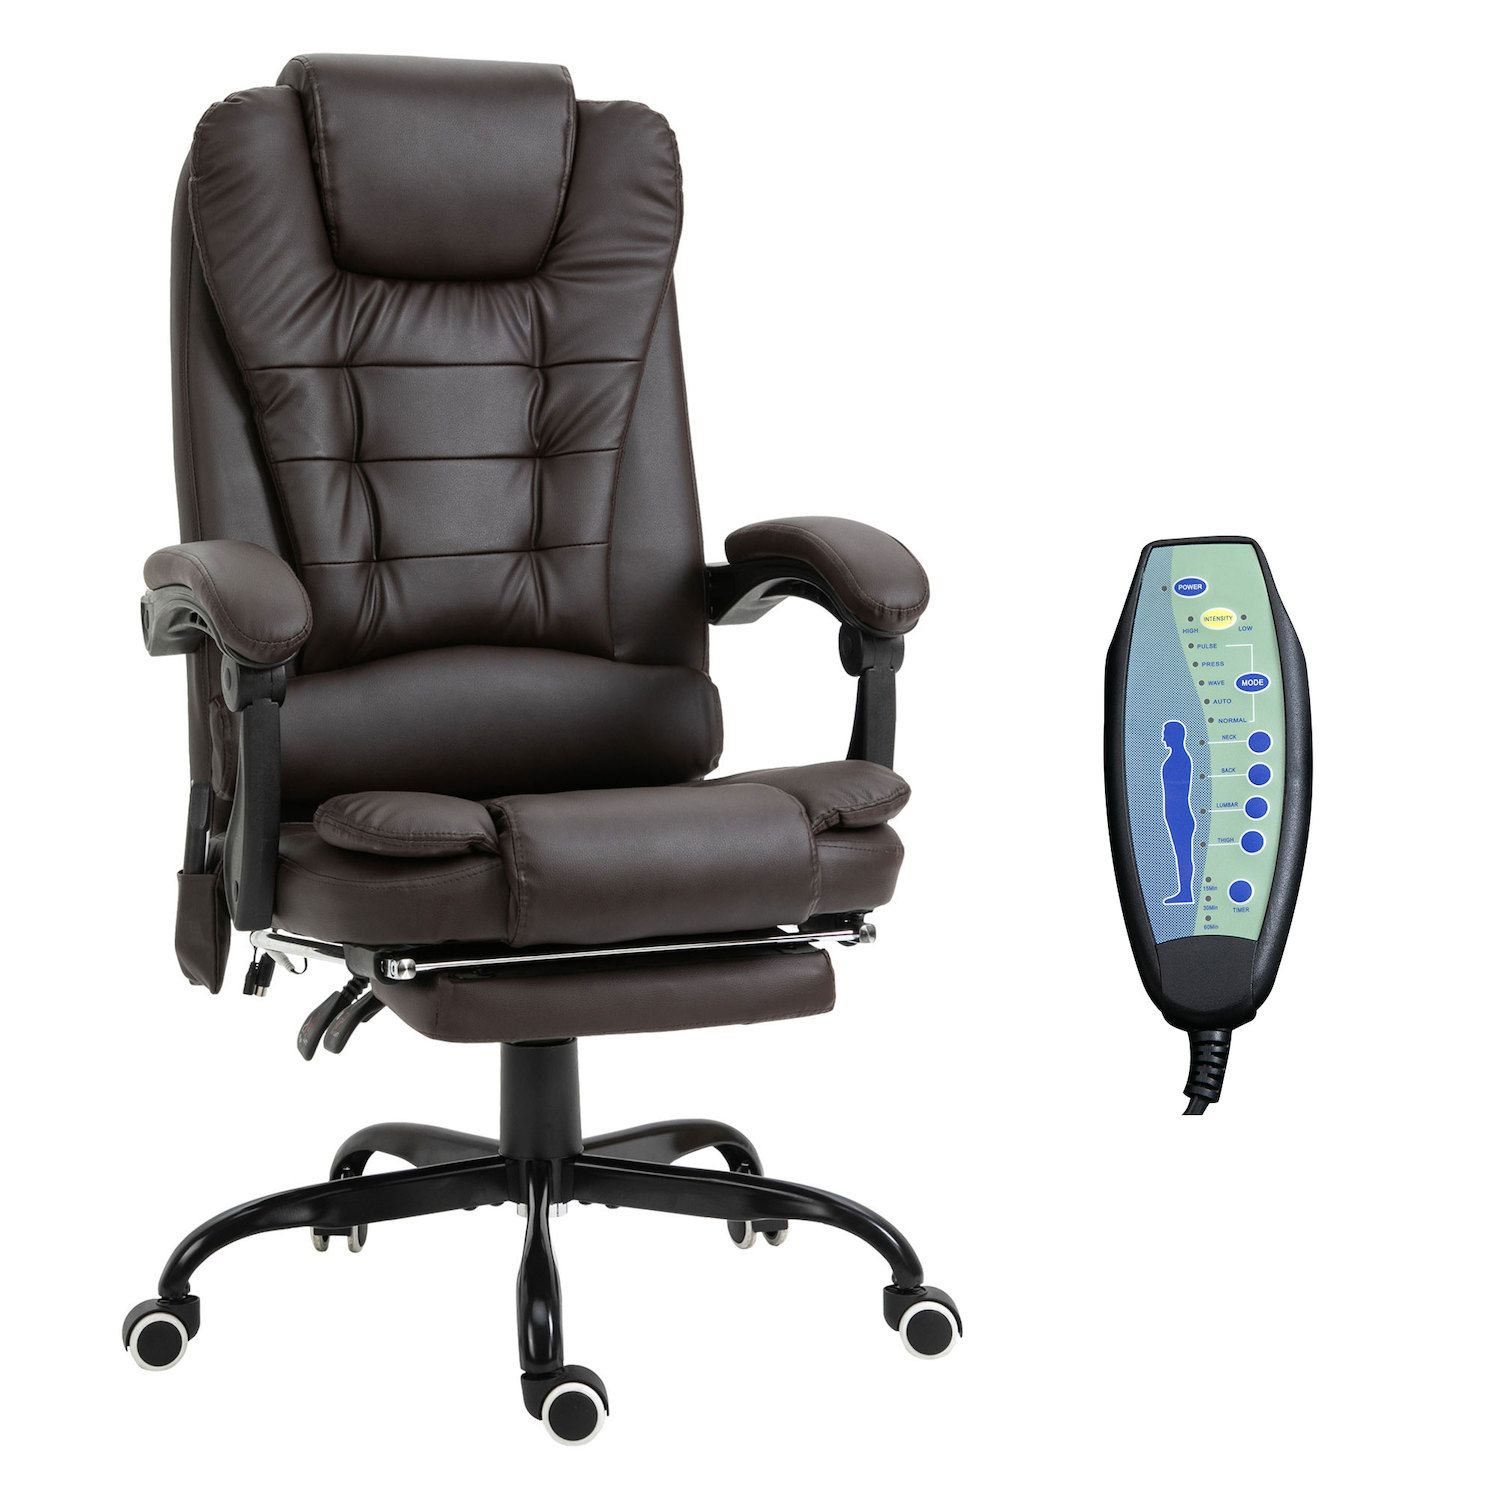 Vinsetto Big and Tall Executive Office Chair with High Back Diamond Stitching Adjustable Height & Swivel Wheels Brown